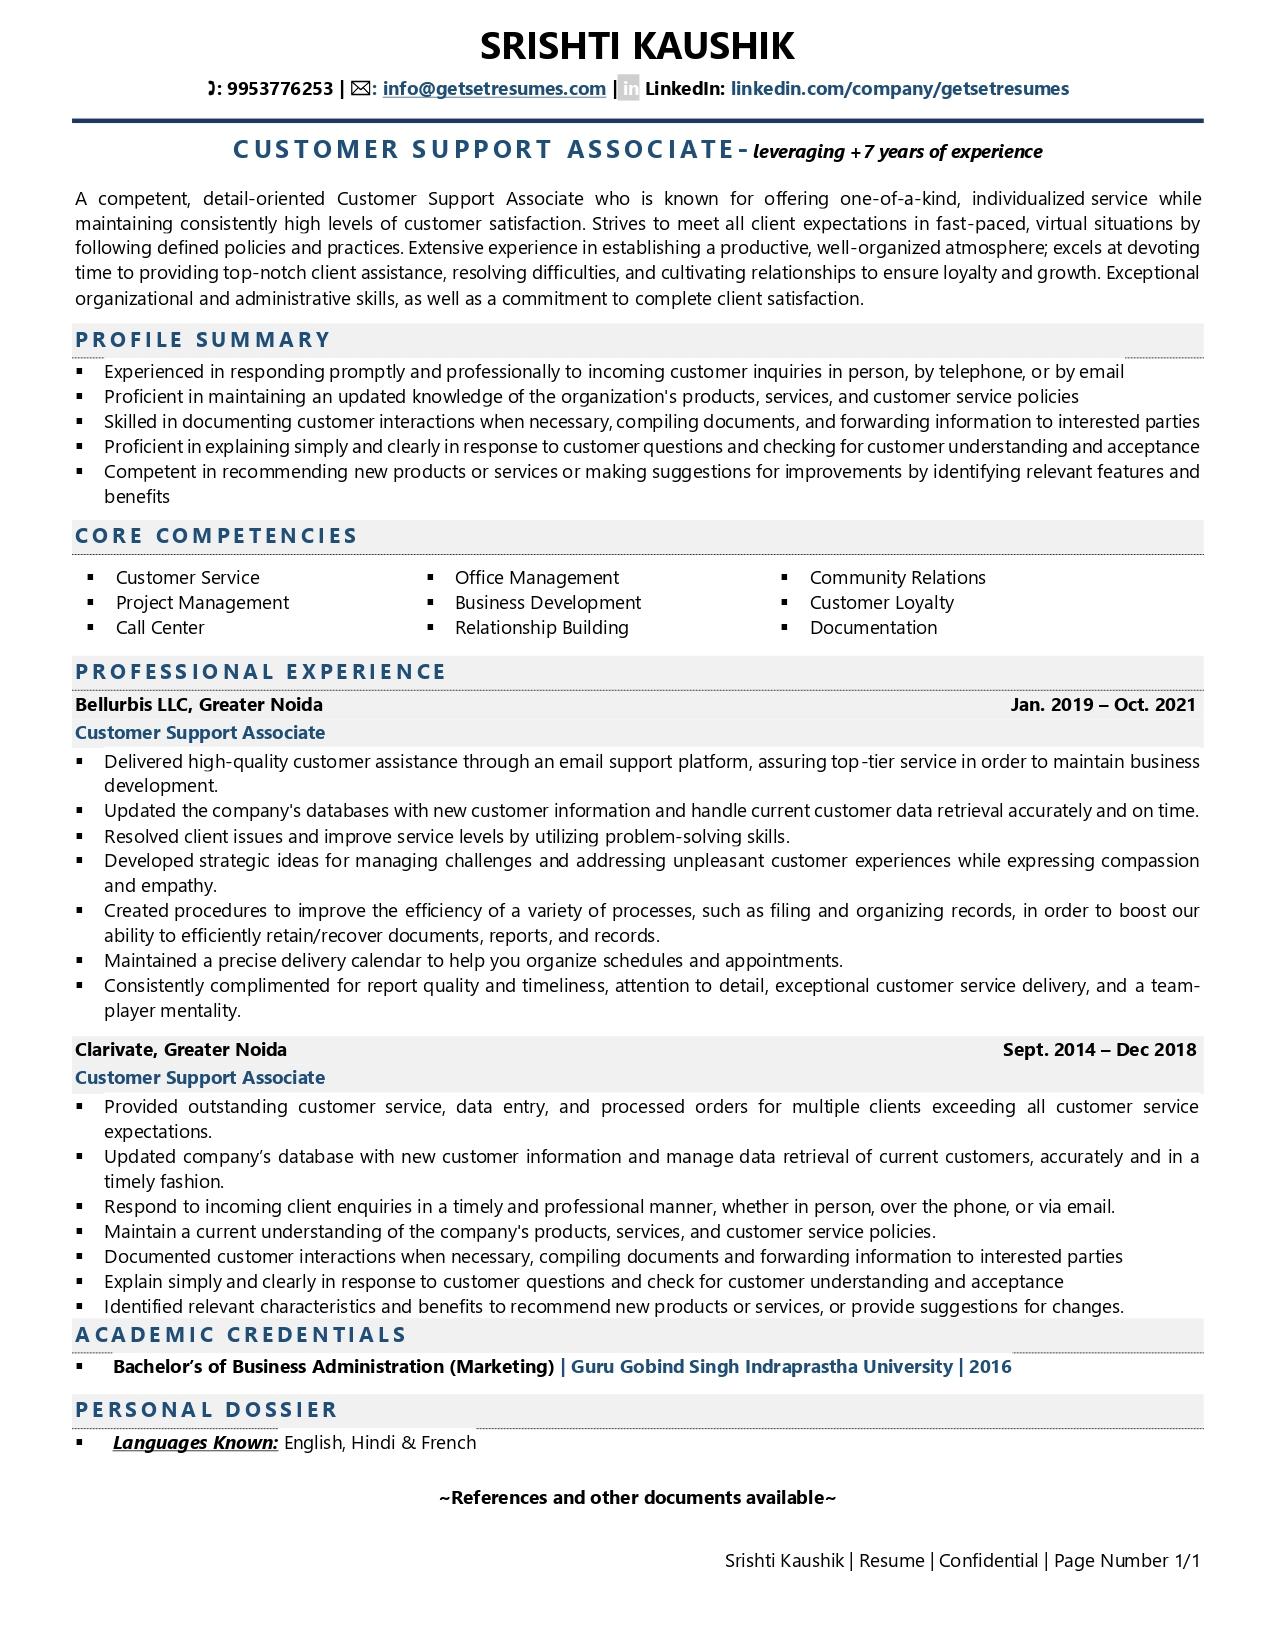 Customer Support Associate - Resume Example & Template